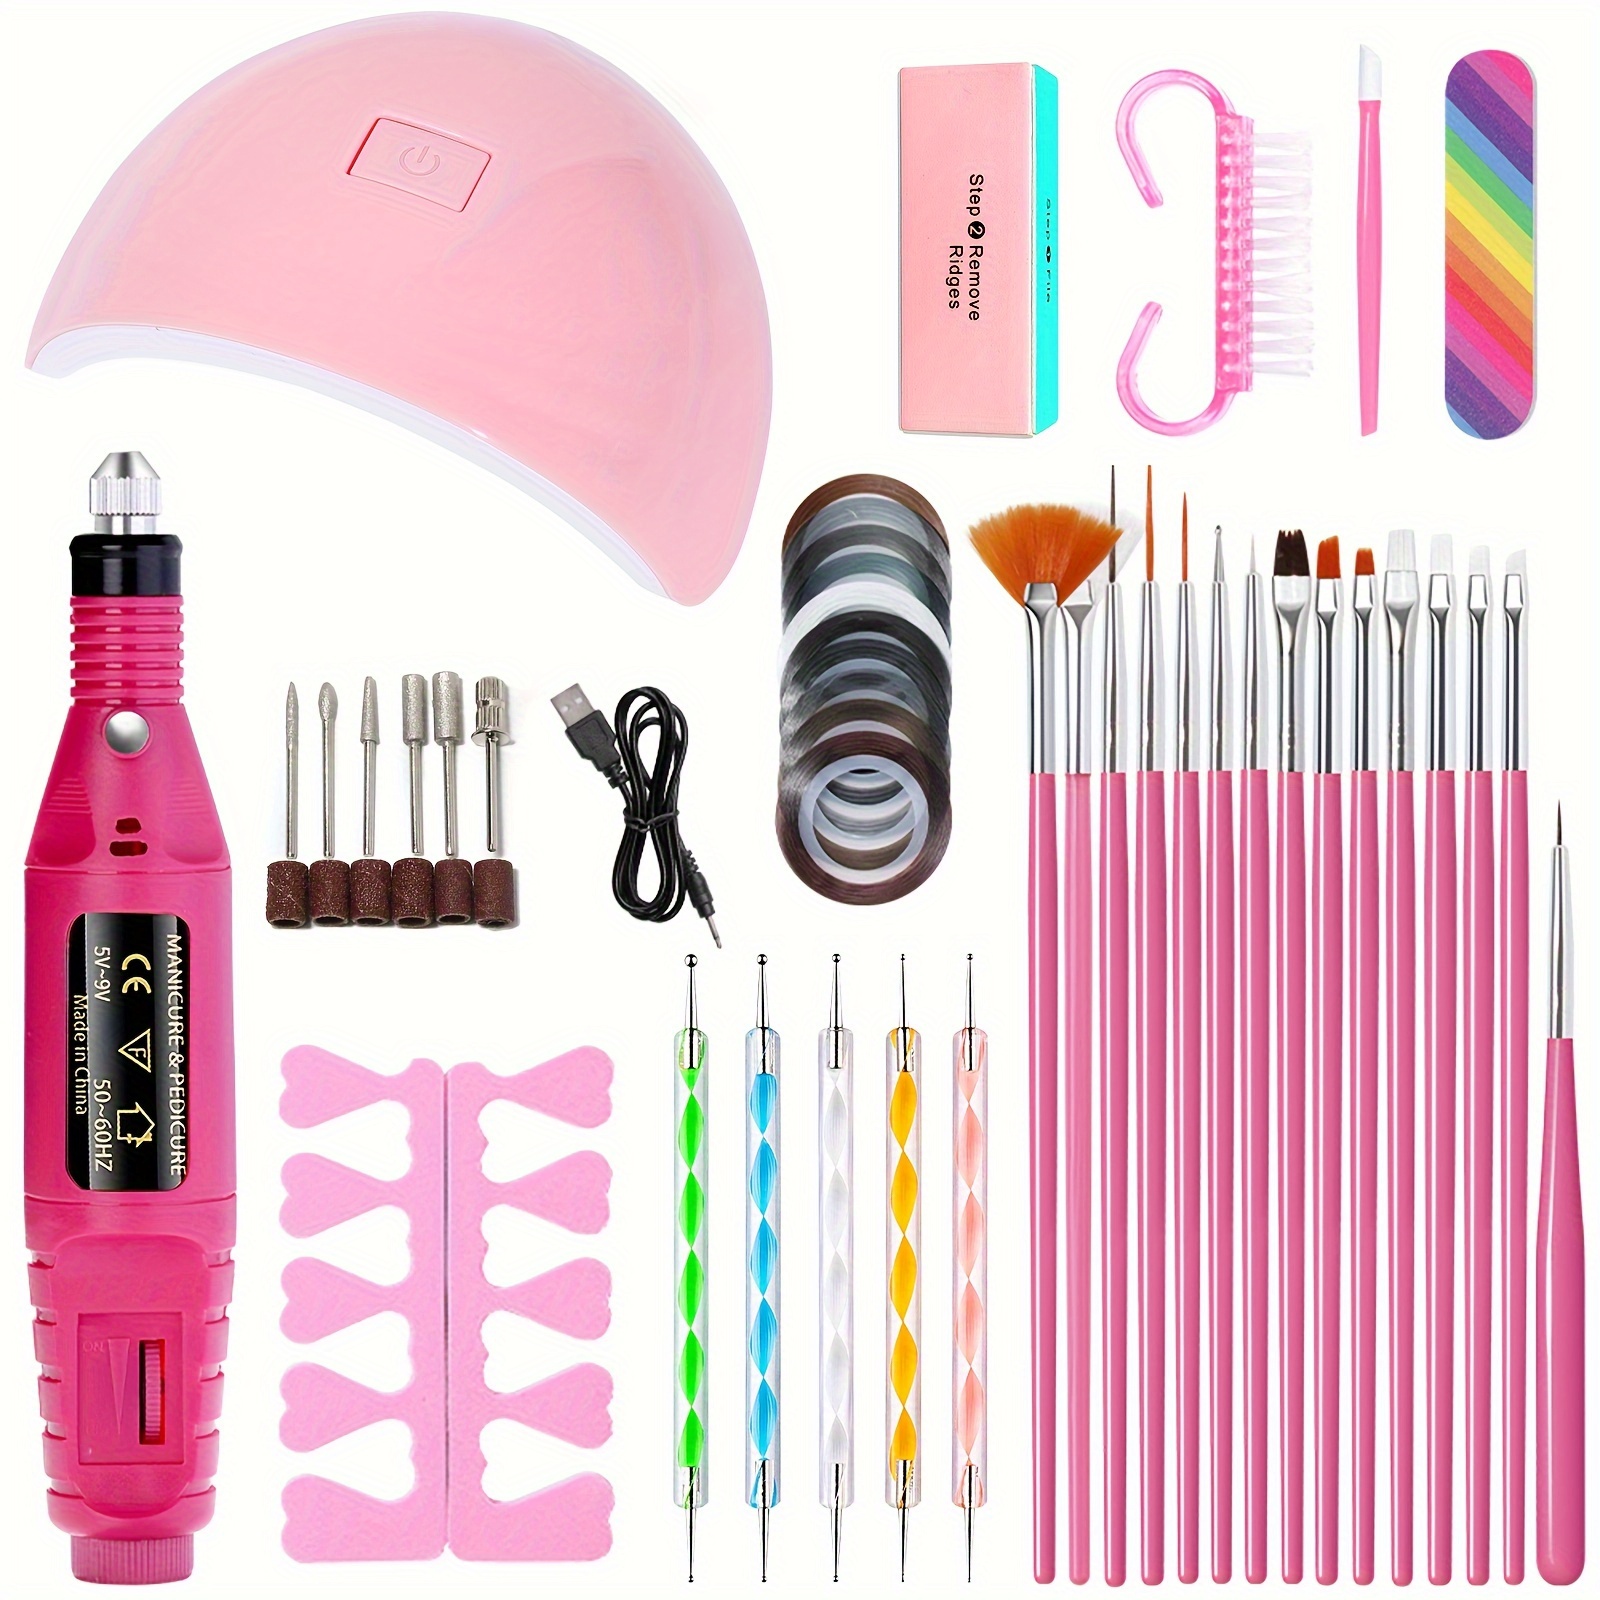 

Professional Nail Tool Set With Lamp & Electric Drill Machine, Complete Manicure & Pedicure Kit For Beginners, Includes Nail Art Brushes And Accessories